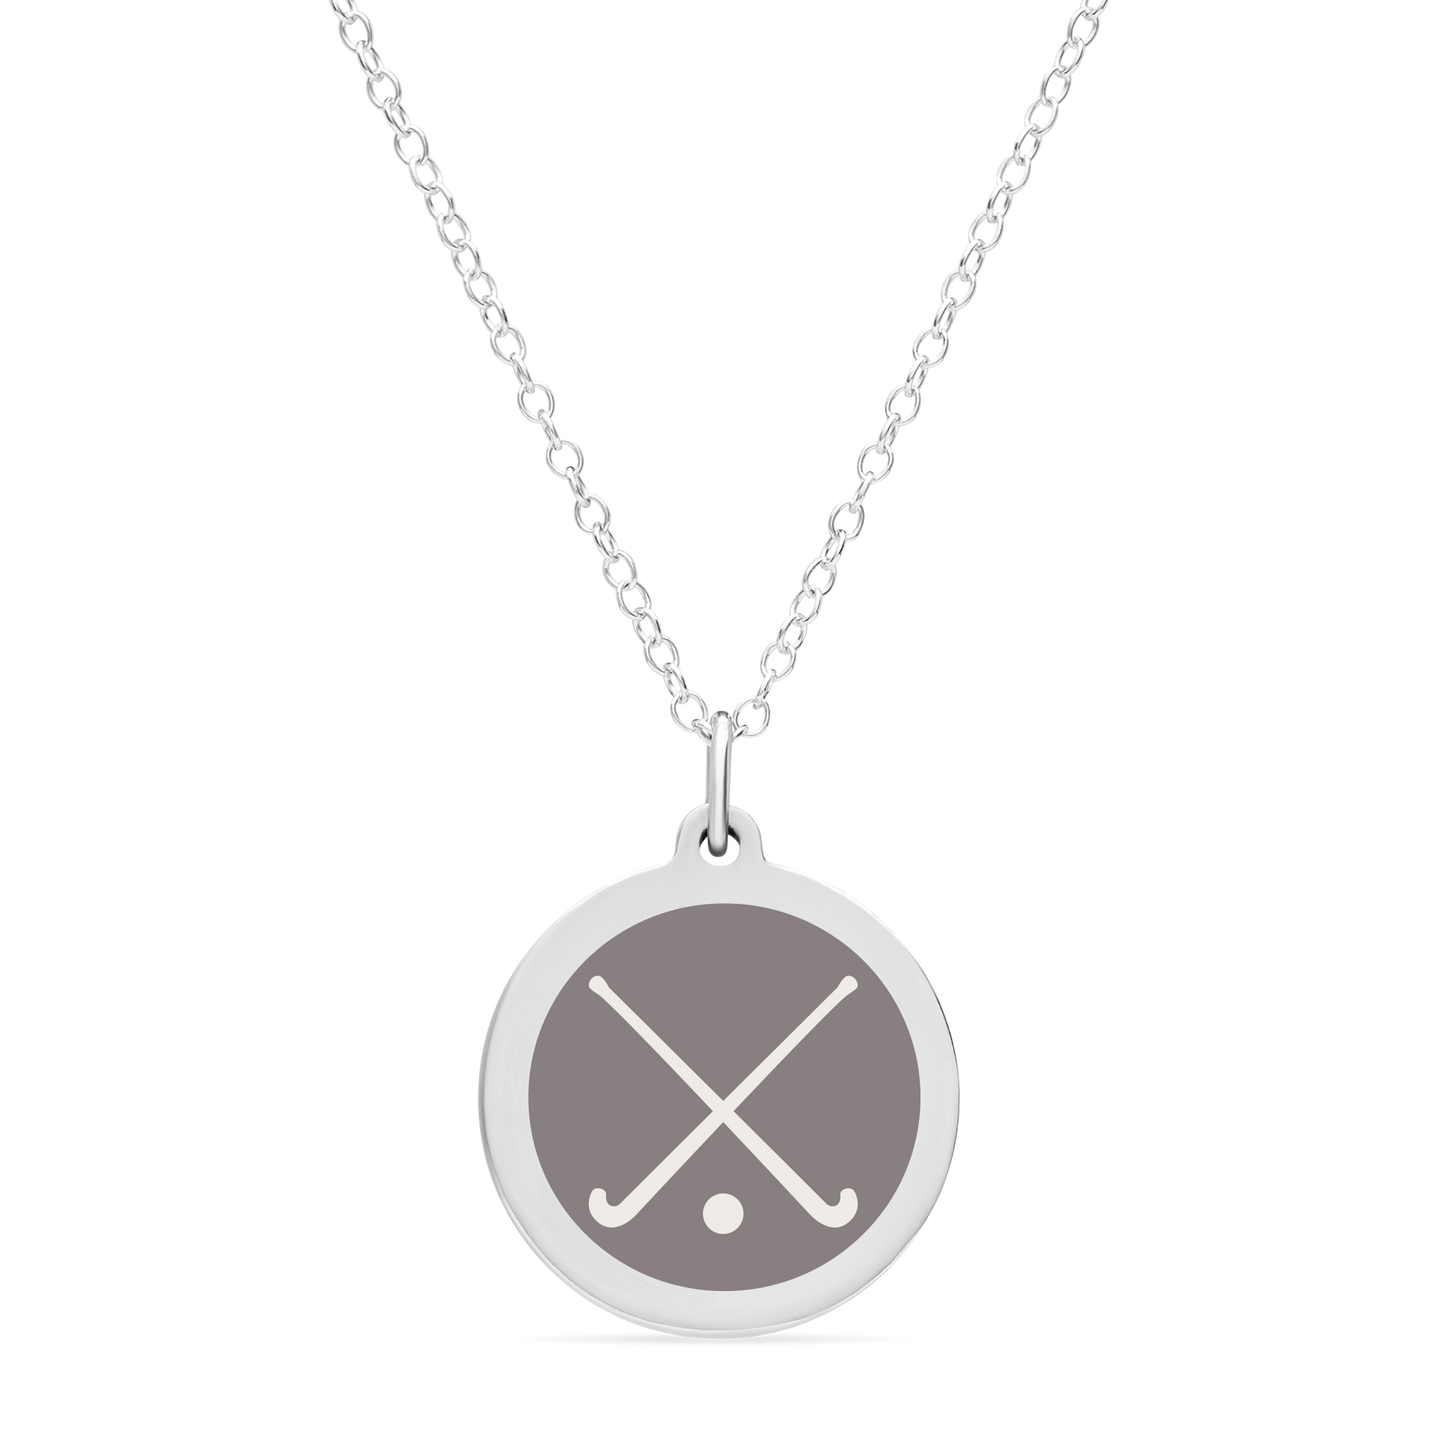 ORIGINAL FIELD HOCKEY CHARM in sterling silver with rhodium plate